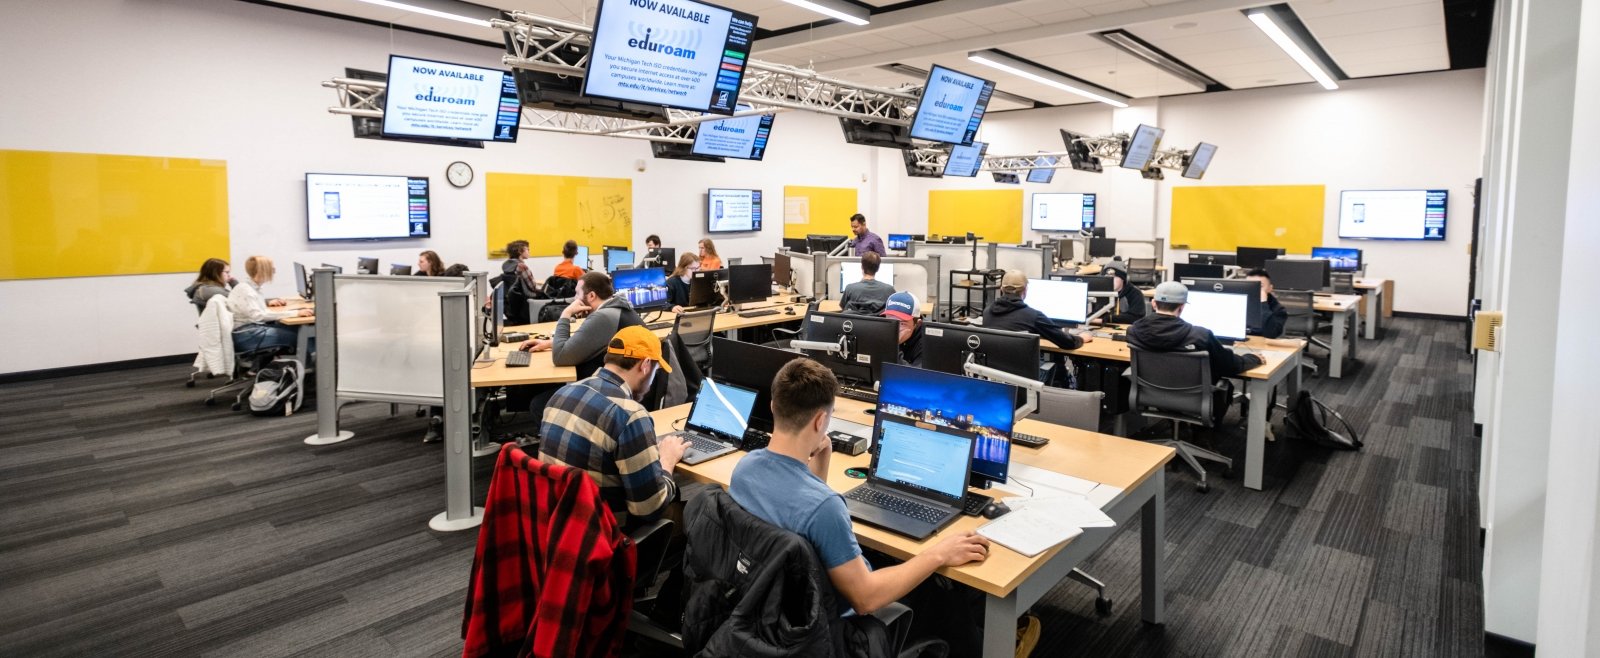 Michigan Tech classroom with students at computers in a room with video screens overhead.